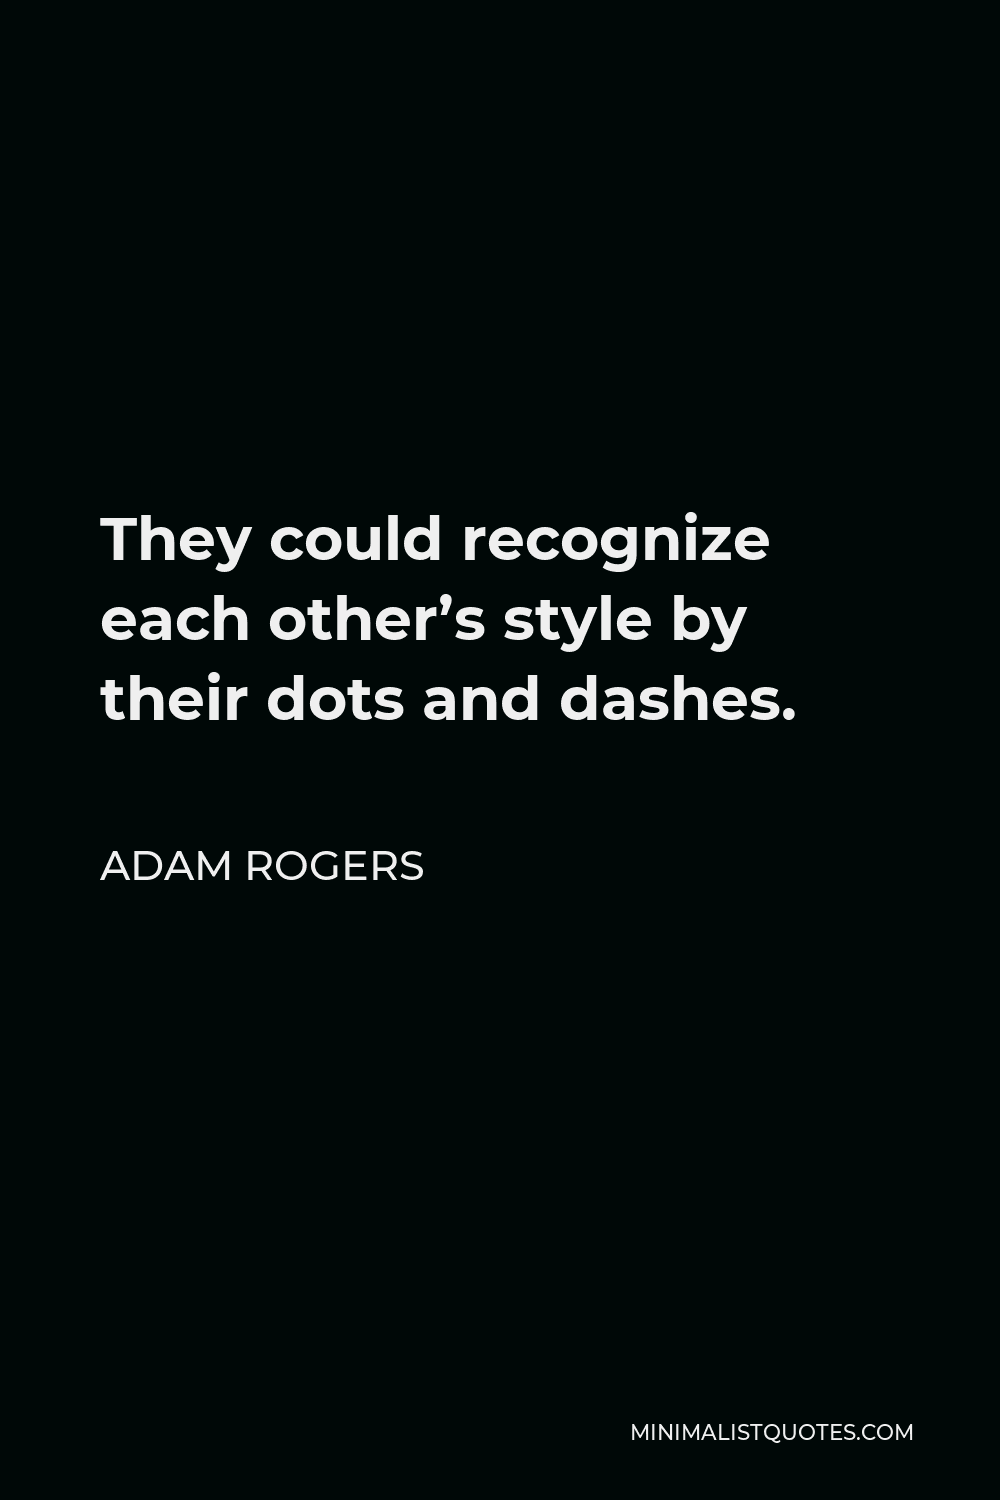 Adam Rogers Quote - They could recognize each other’s style by their dots and dashes. They called that the “fist.” St. George, they have a fist.